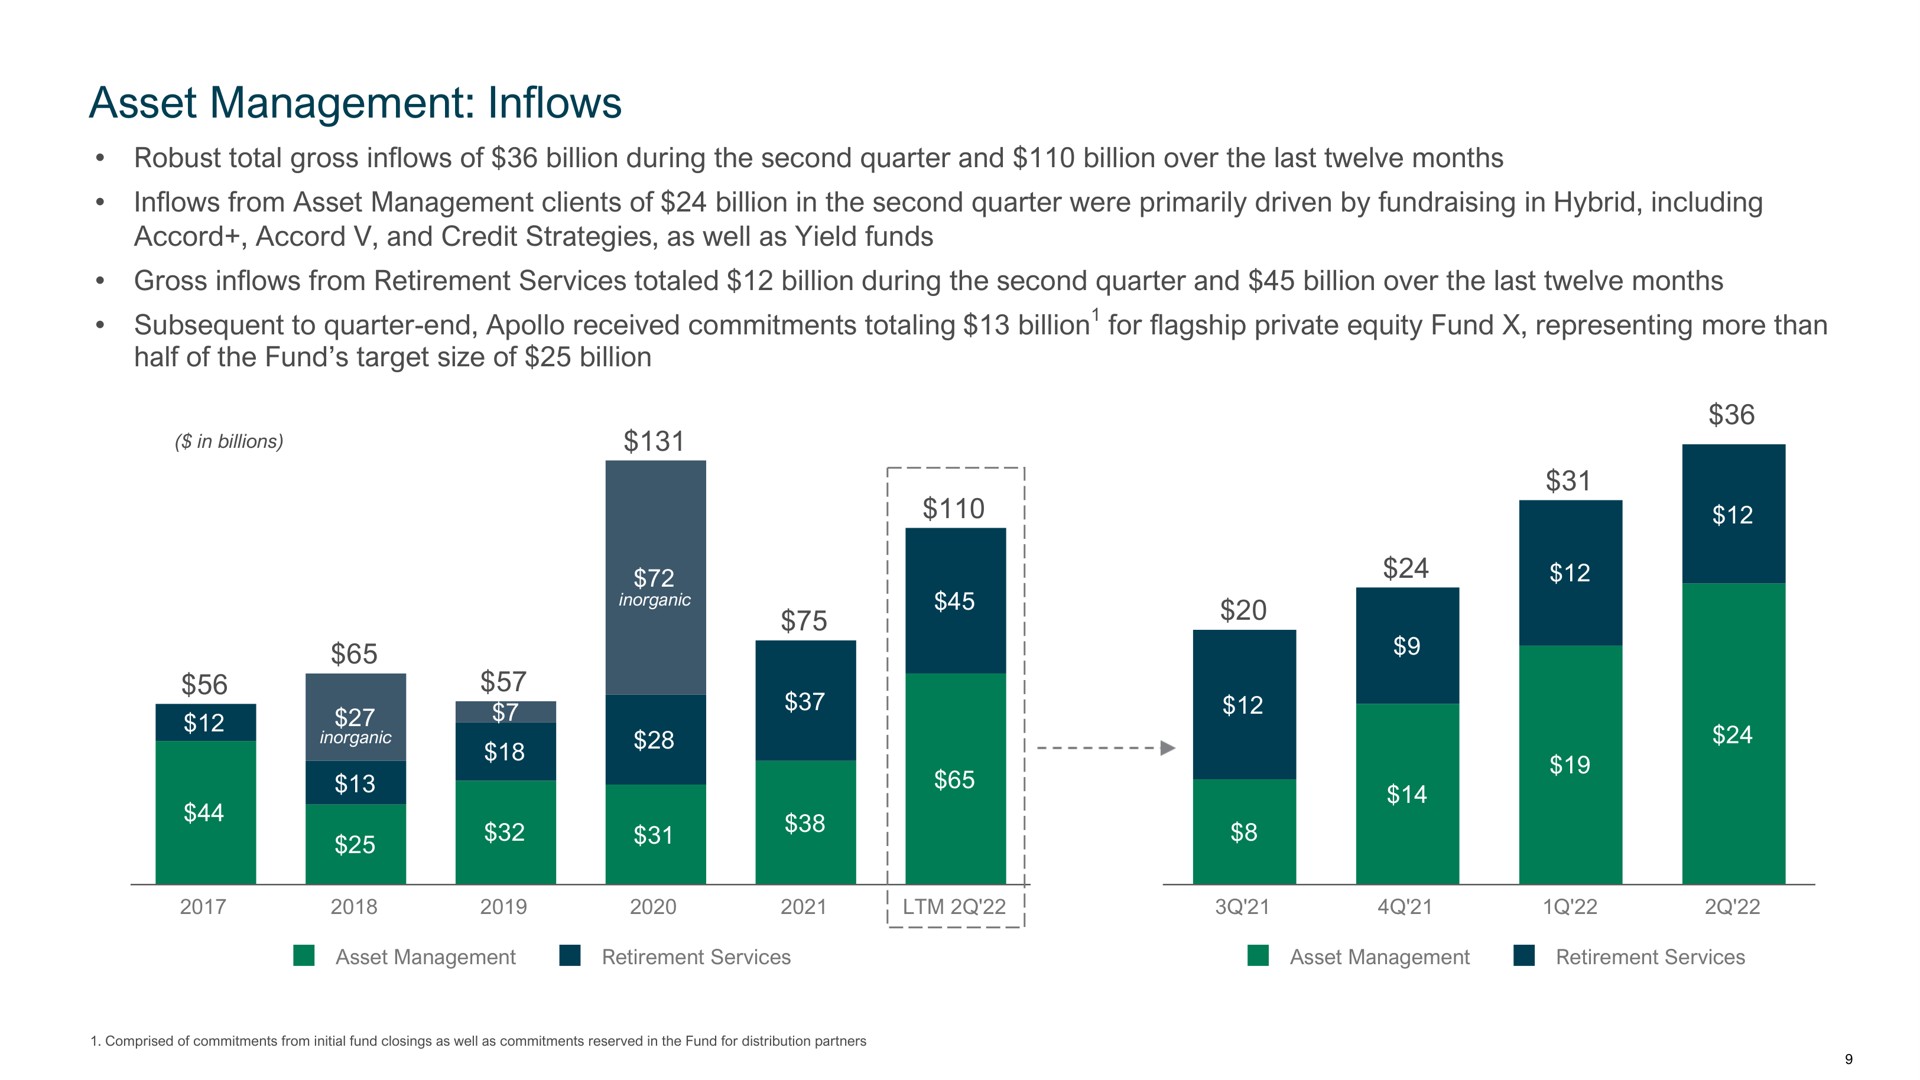 asset management inflows robust total gross inflows of billion during the second quarter and billion over the last twelve months inflows from asset management clients of billion in the second quarter were primarily driven by in hybrid including accord accord and credit strategies as well as yield funds gross inflows from retirement services totaled billion during the second quarter and billion over the last twelve months subsequent to quarter end received commitments totaling billion for flagship private equity fund representing more than half of the fund target size of billion | Apollo Global Management